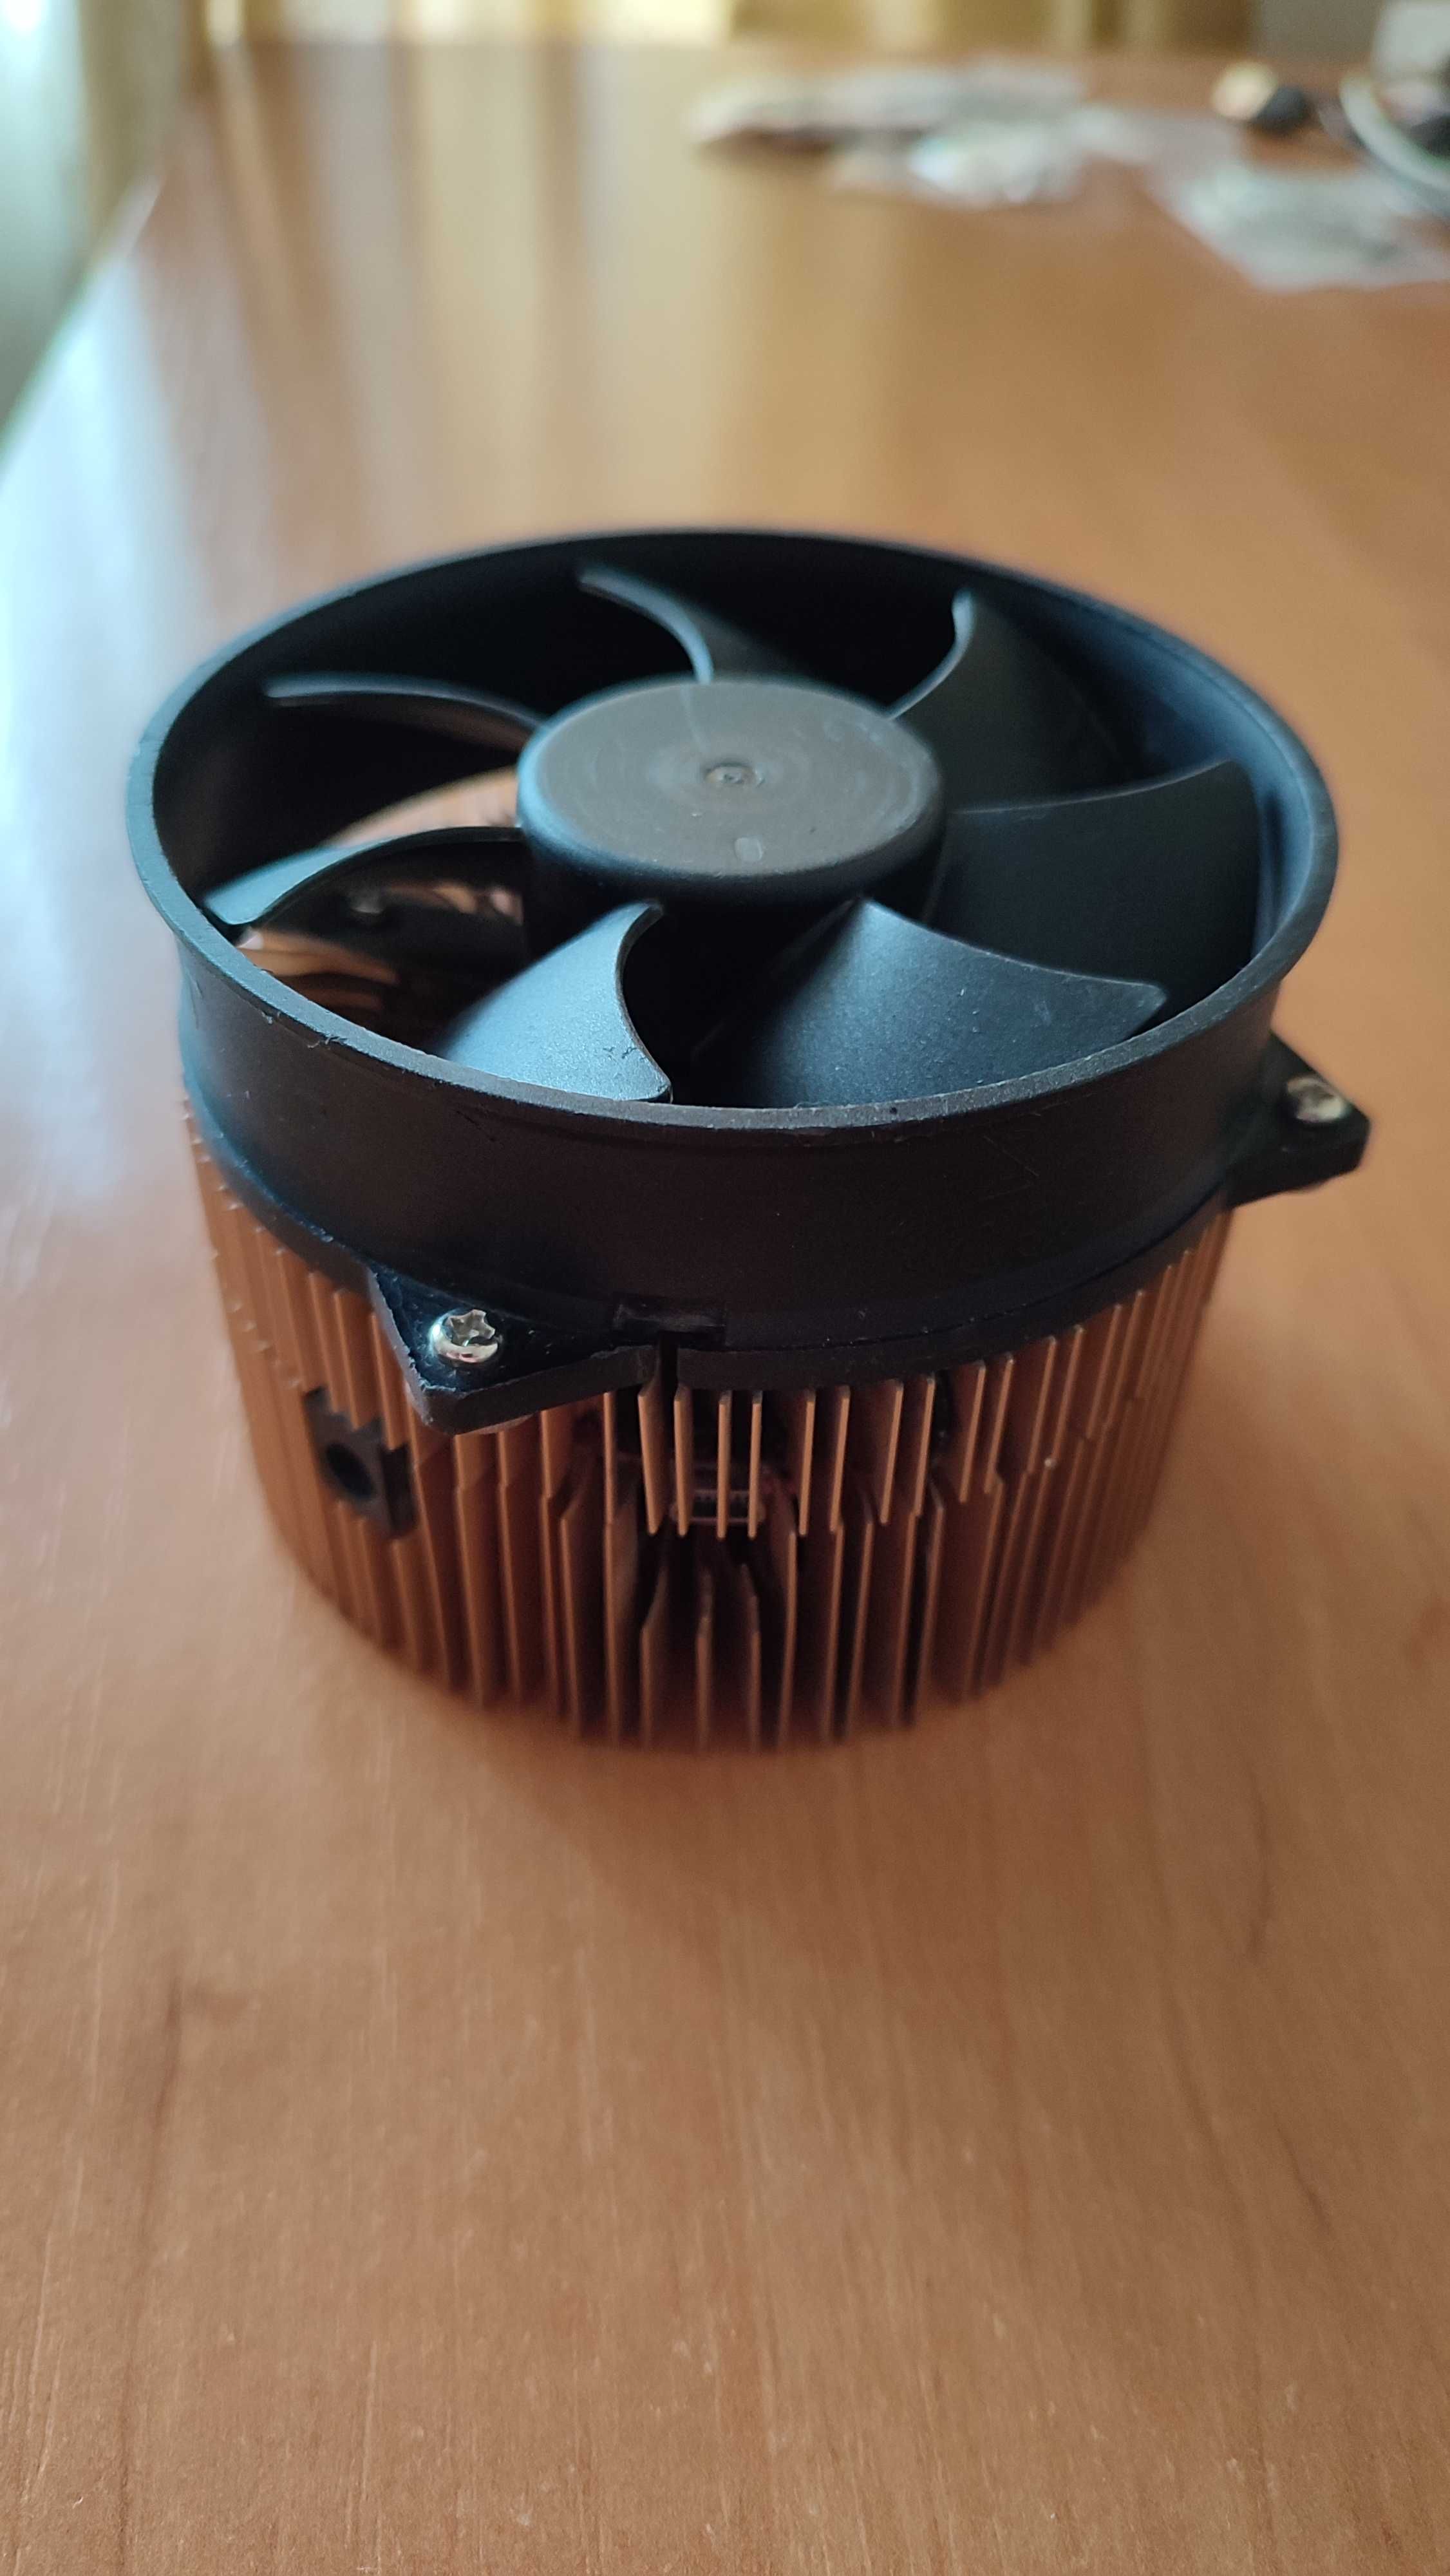 Asic Miner Асик GridSeed GC3355 Dual Miner SHA256 + Scrypt